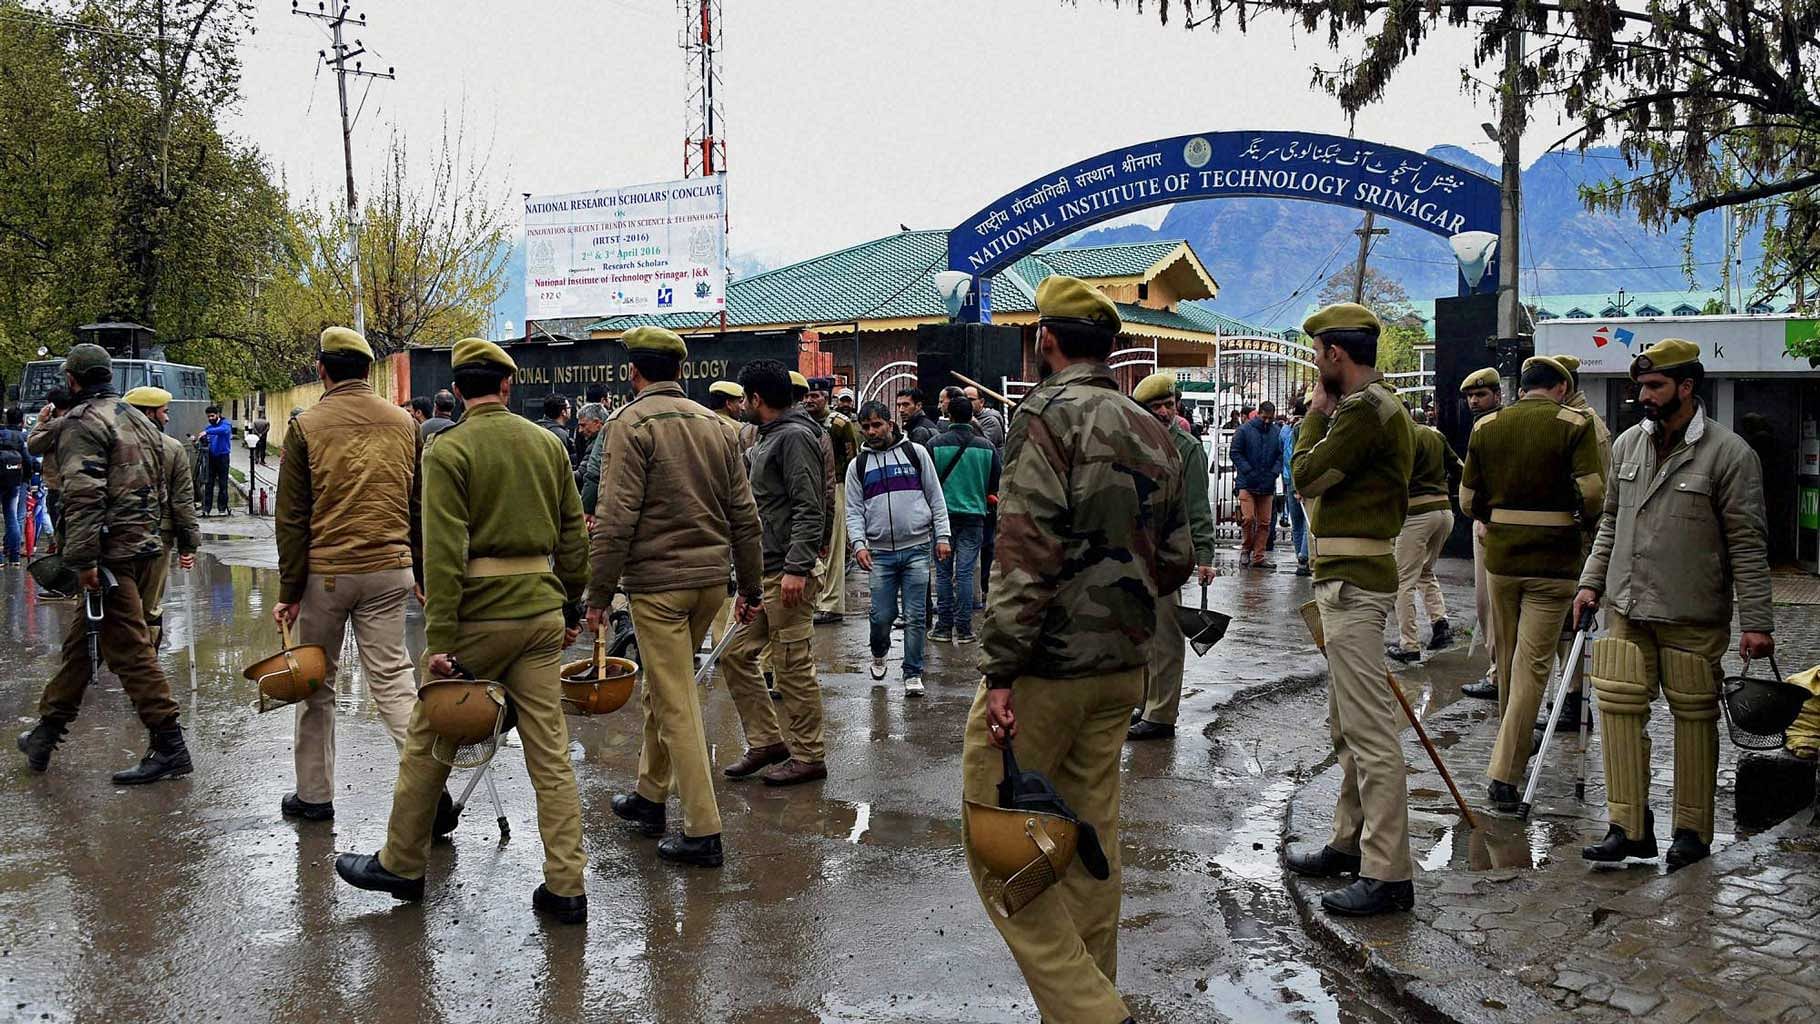 Police and CRPF personnel at National Institute of Technology (NIT) following tensions between the local and non-local students of the institute in Srinagar on Wednesday, 6 April 2016. (Photo: PTI)